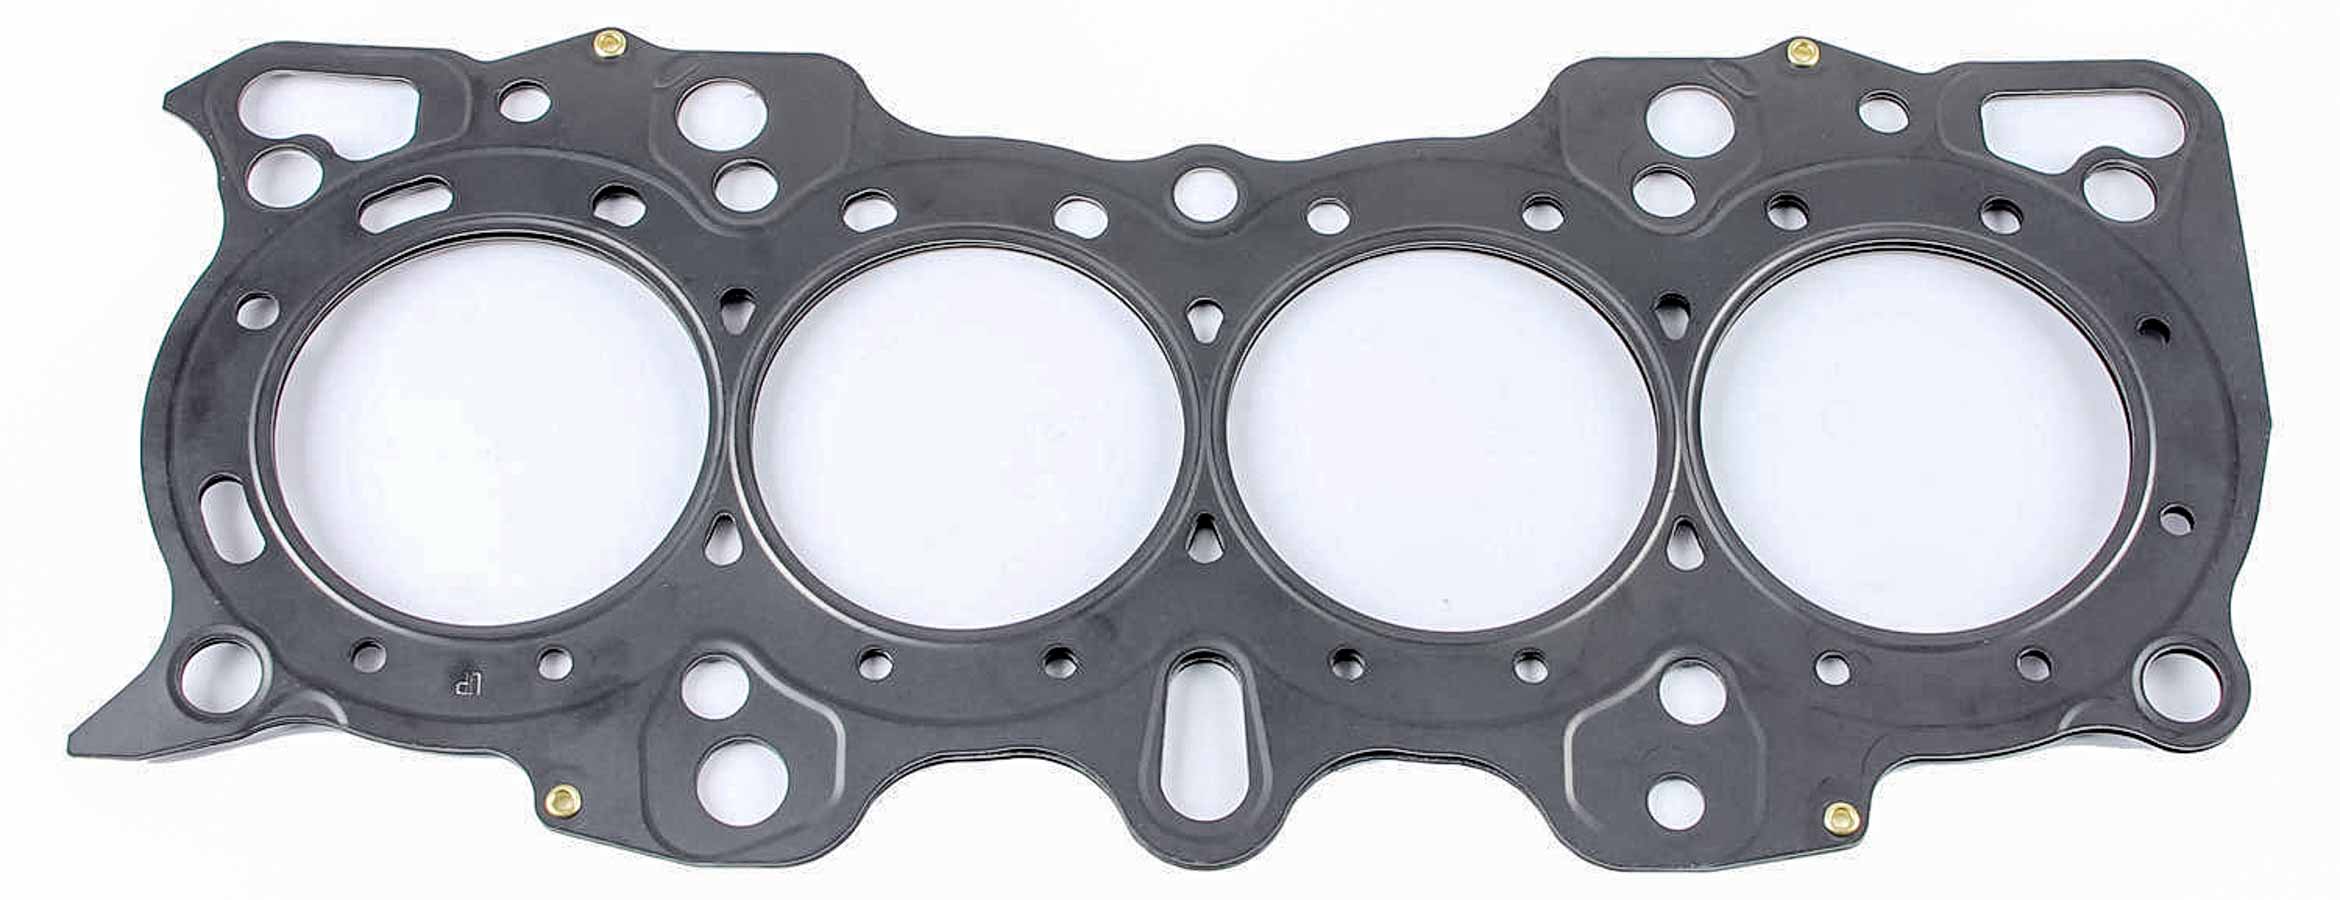 Cometic C4235-051 Cylinder Head Gasket 0.051" 87mm Bore NEW